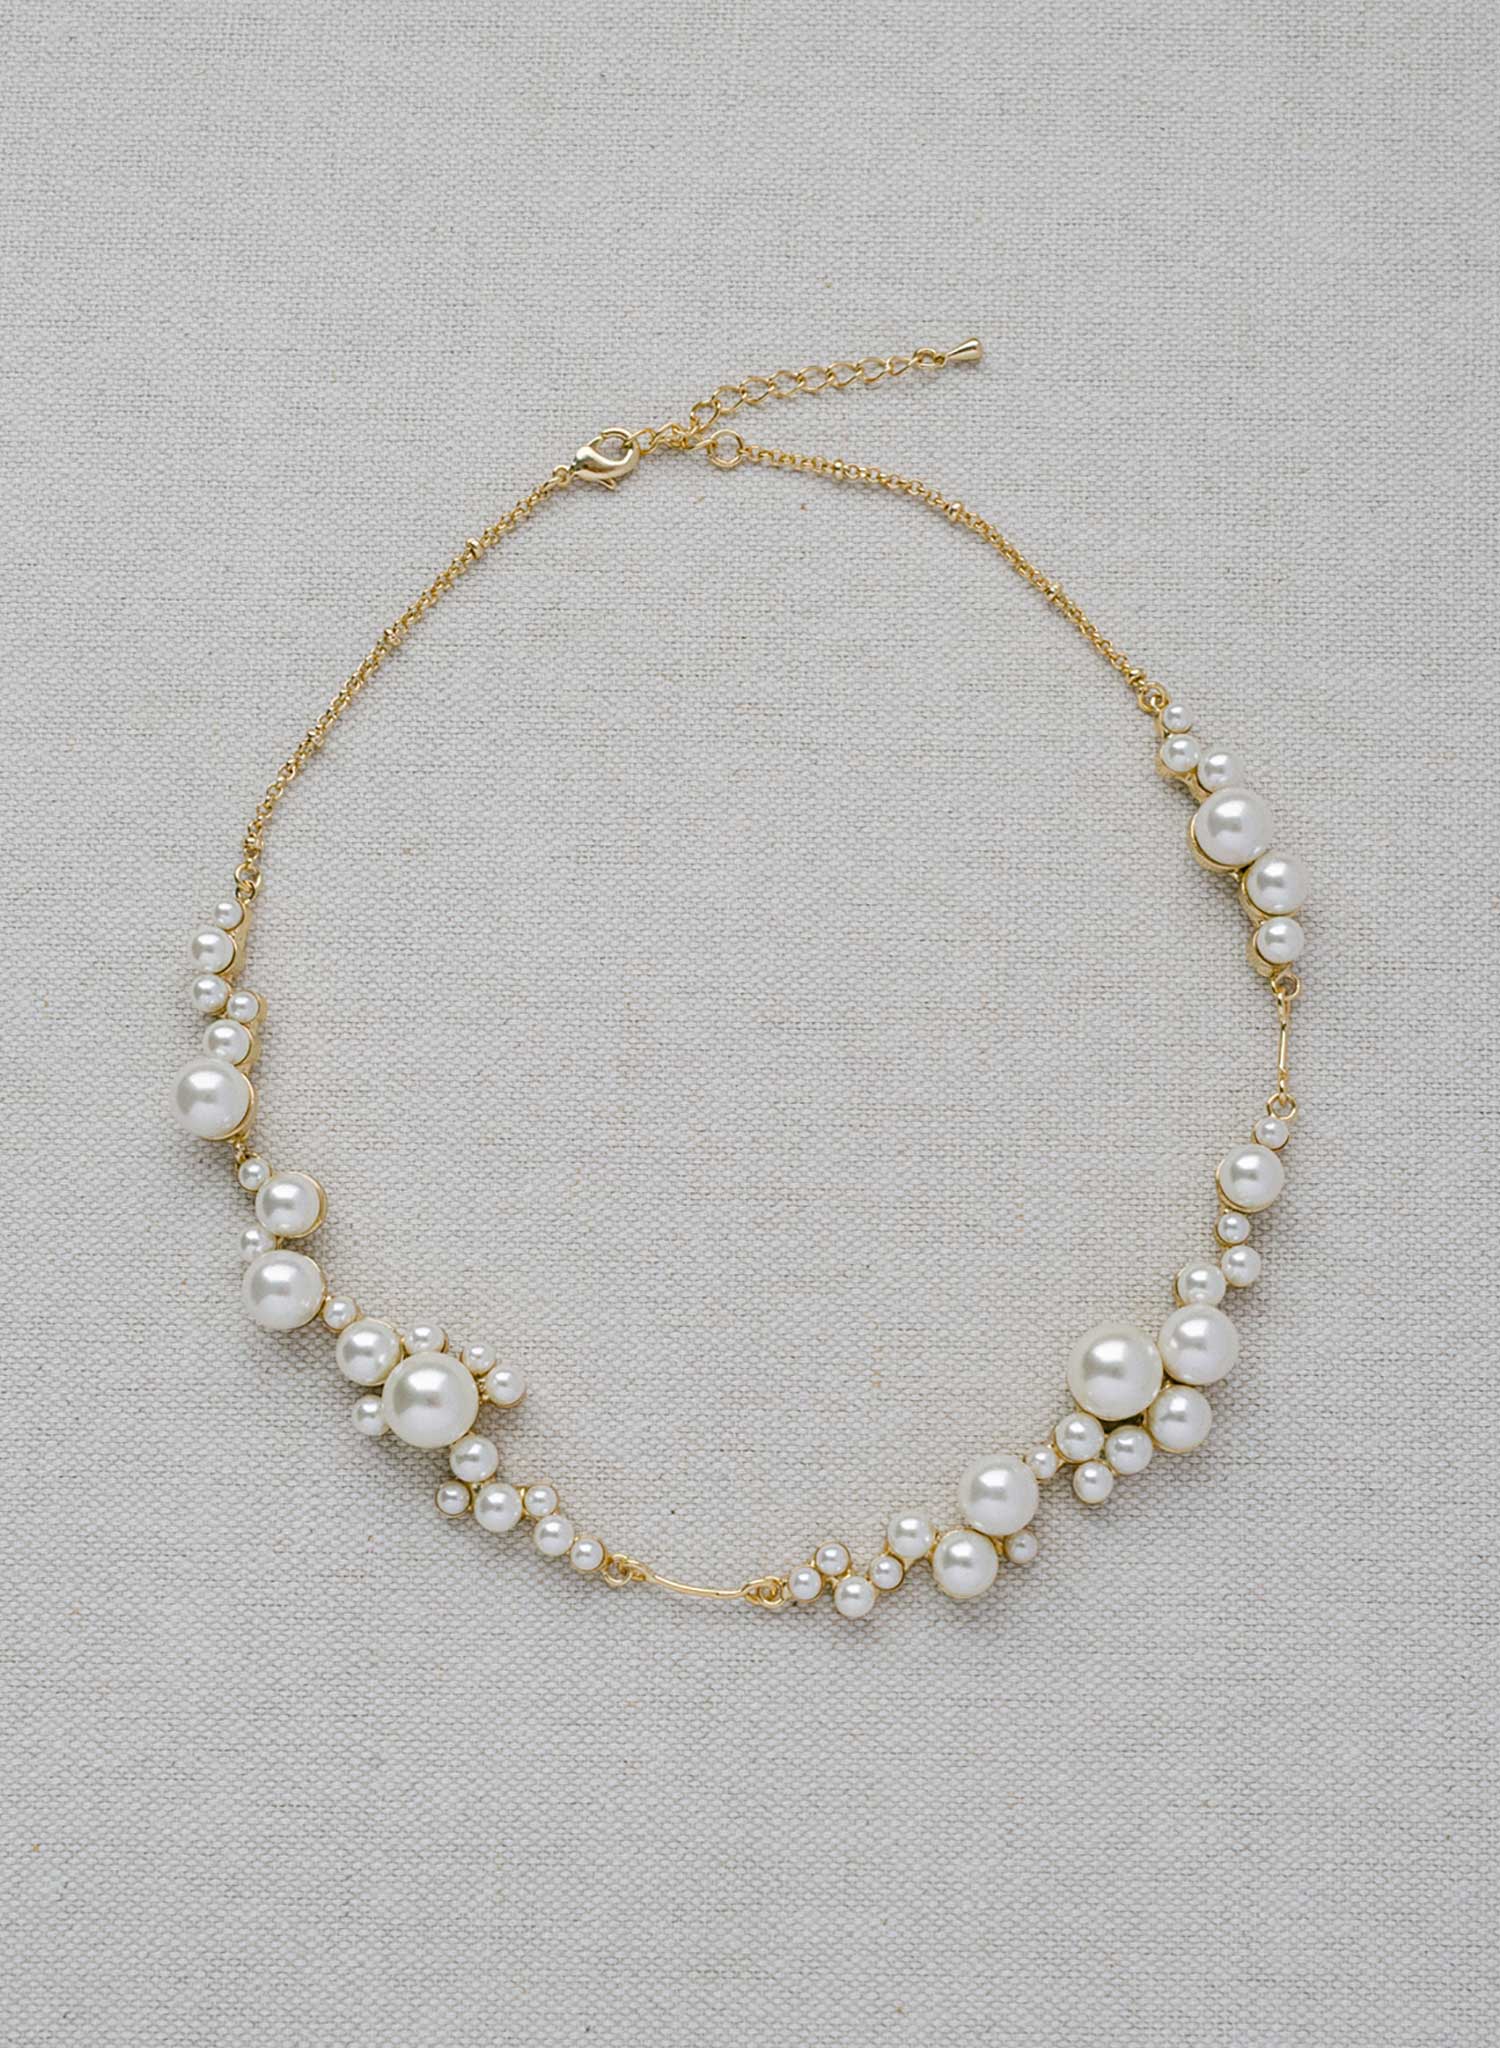 Pearl droplets bridal necklace - Style #2428